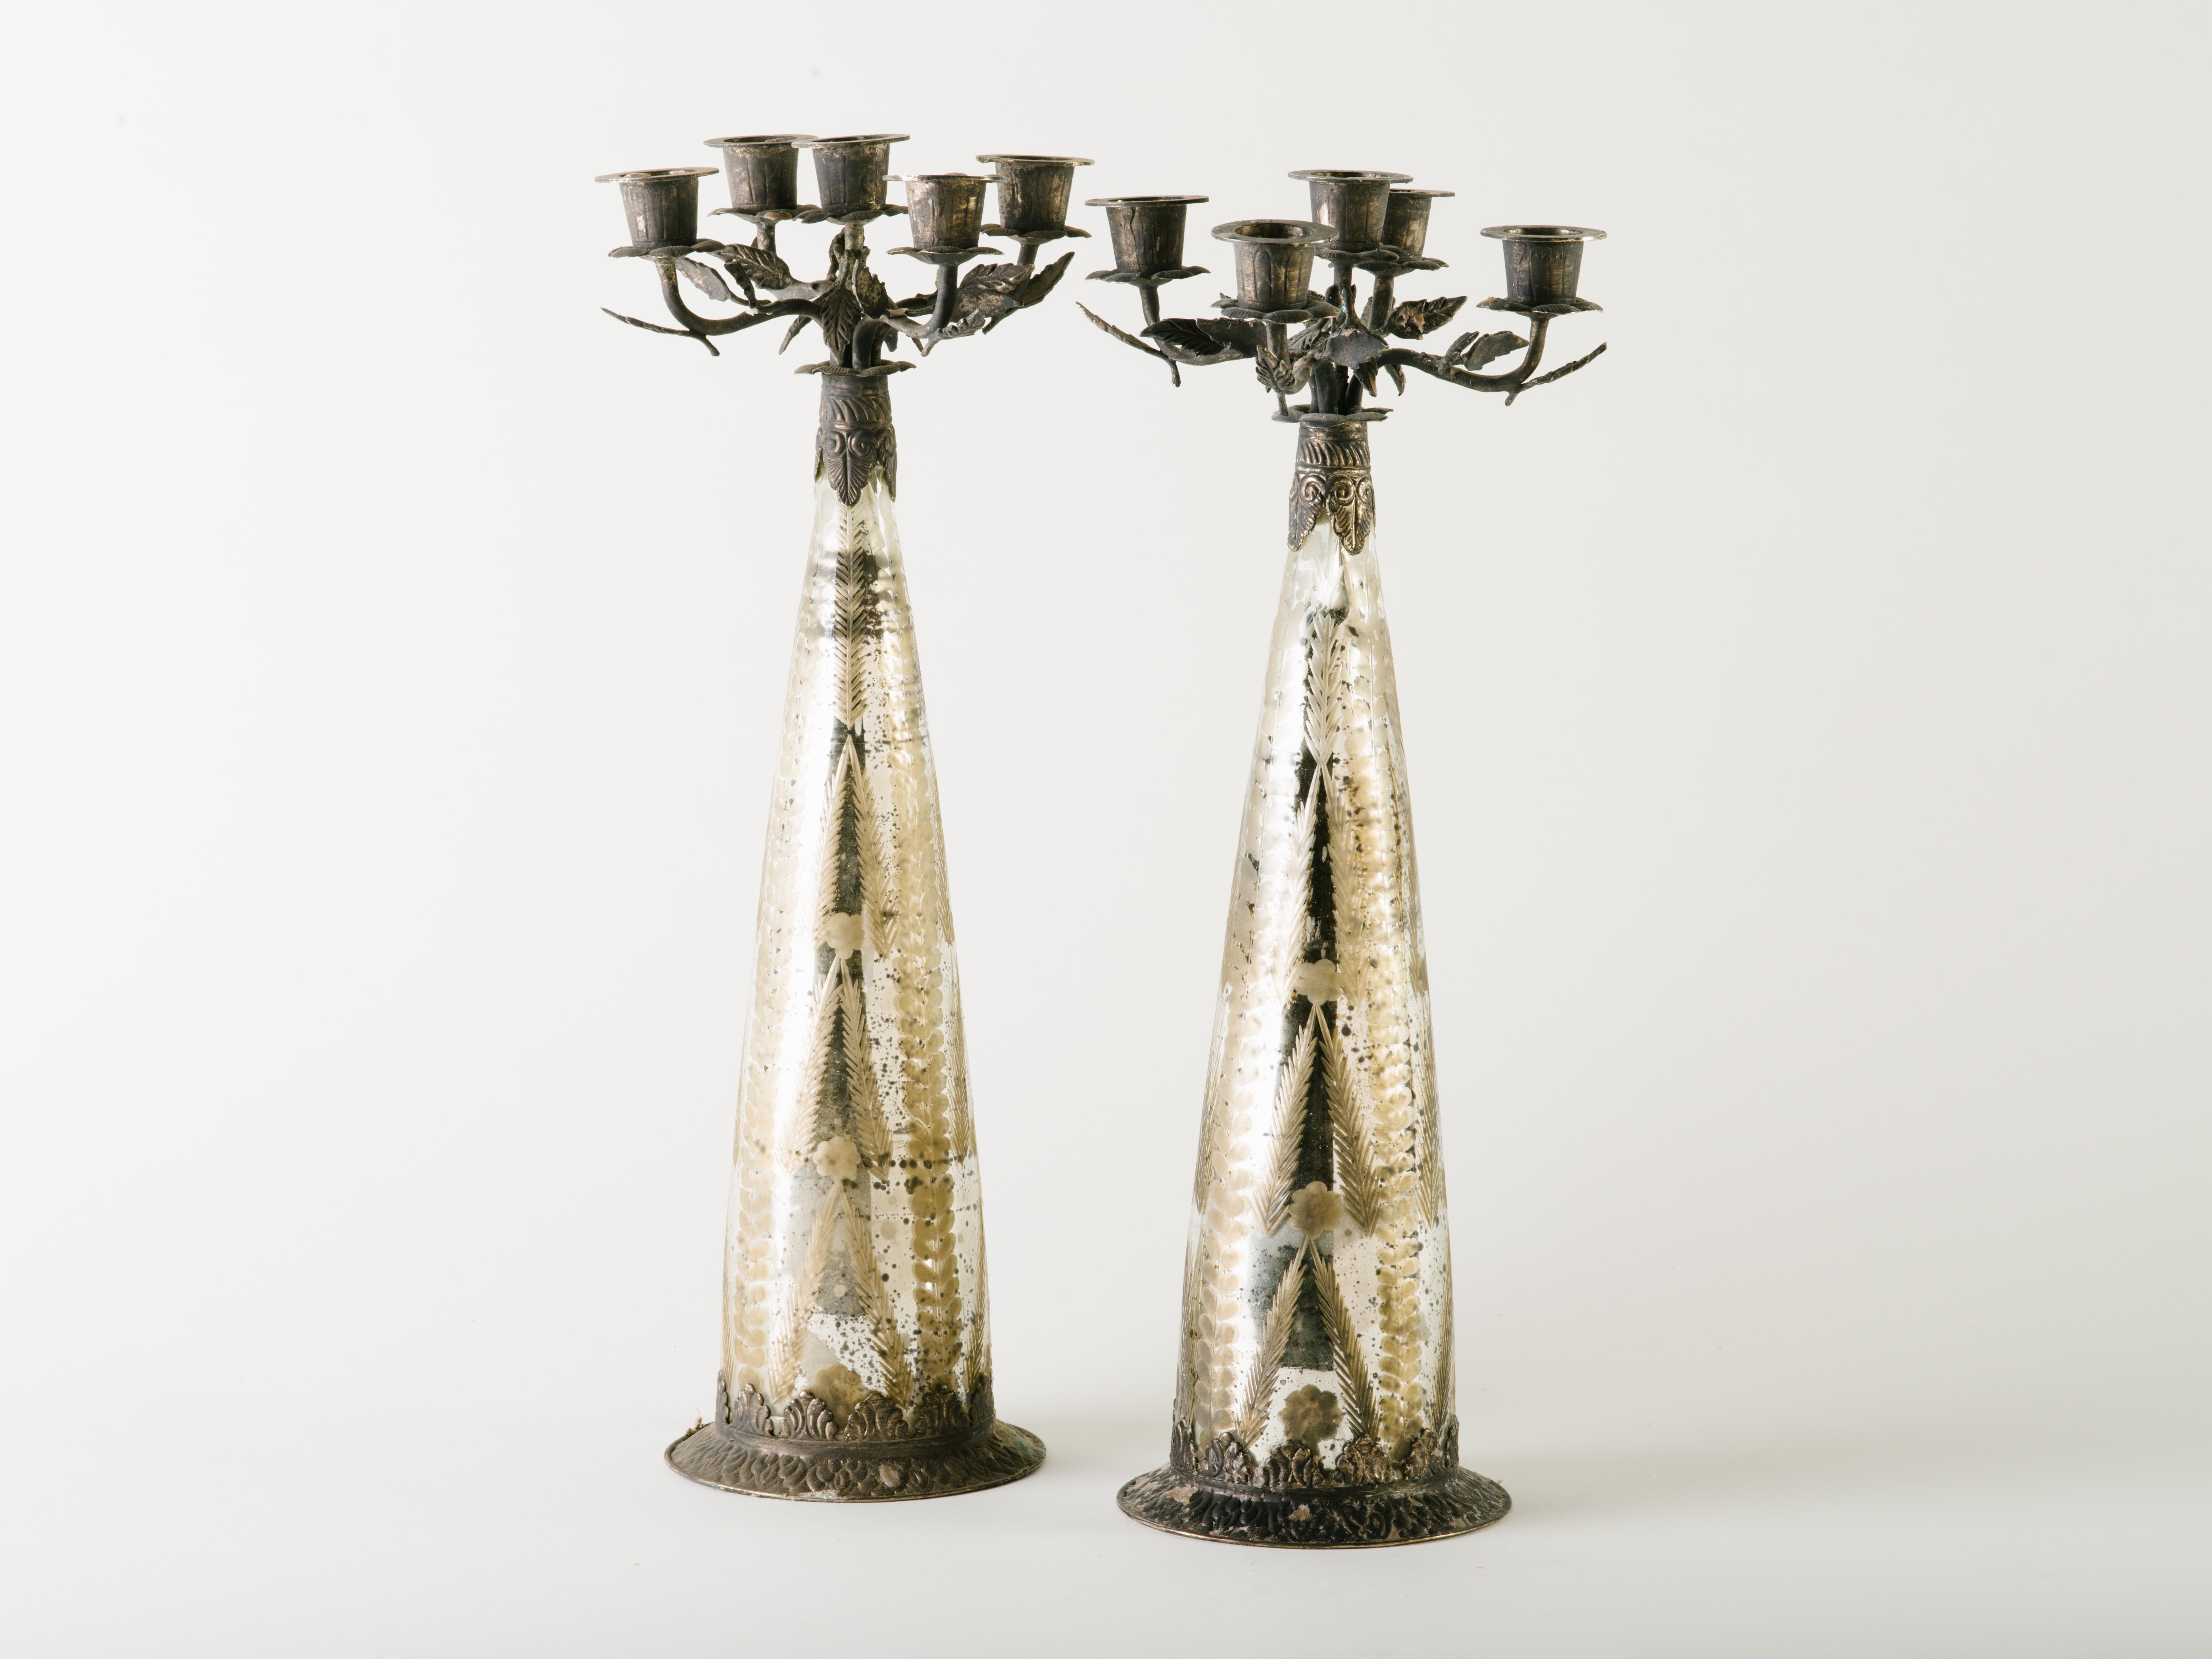 Stunning set of candelabra in antiqued mercury glass with etched designs. The candelabras have tapered forms with hand-forged metal designs throughout. Gothic Revival design features patinated metal leaves along the candle holders and along the